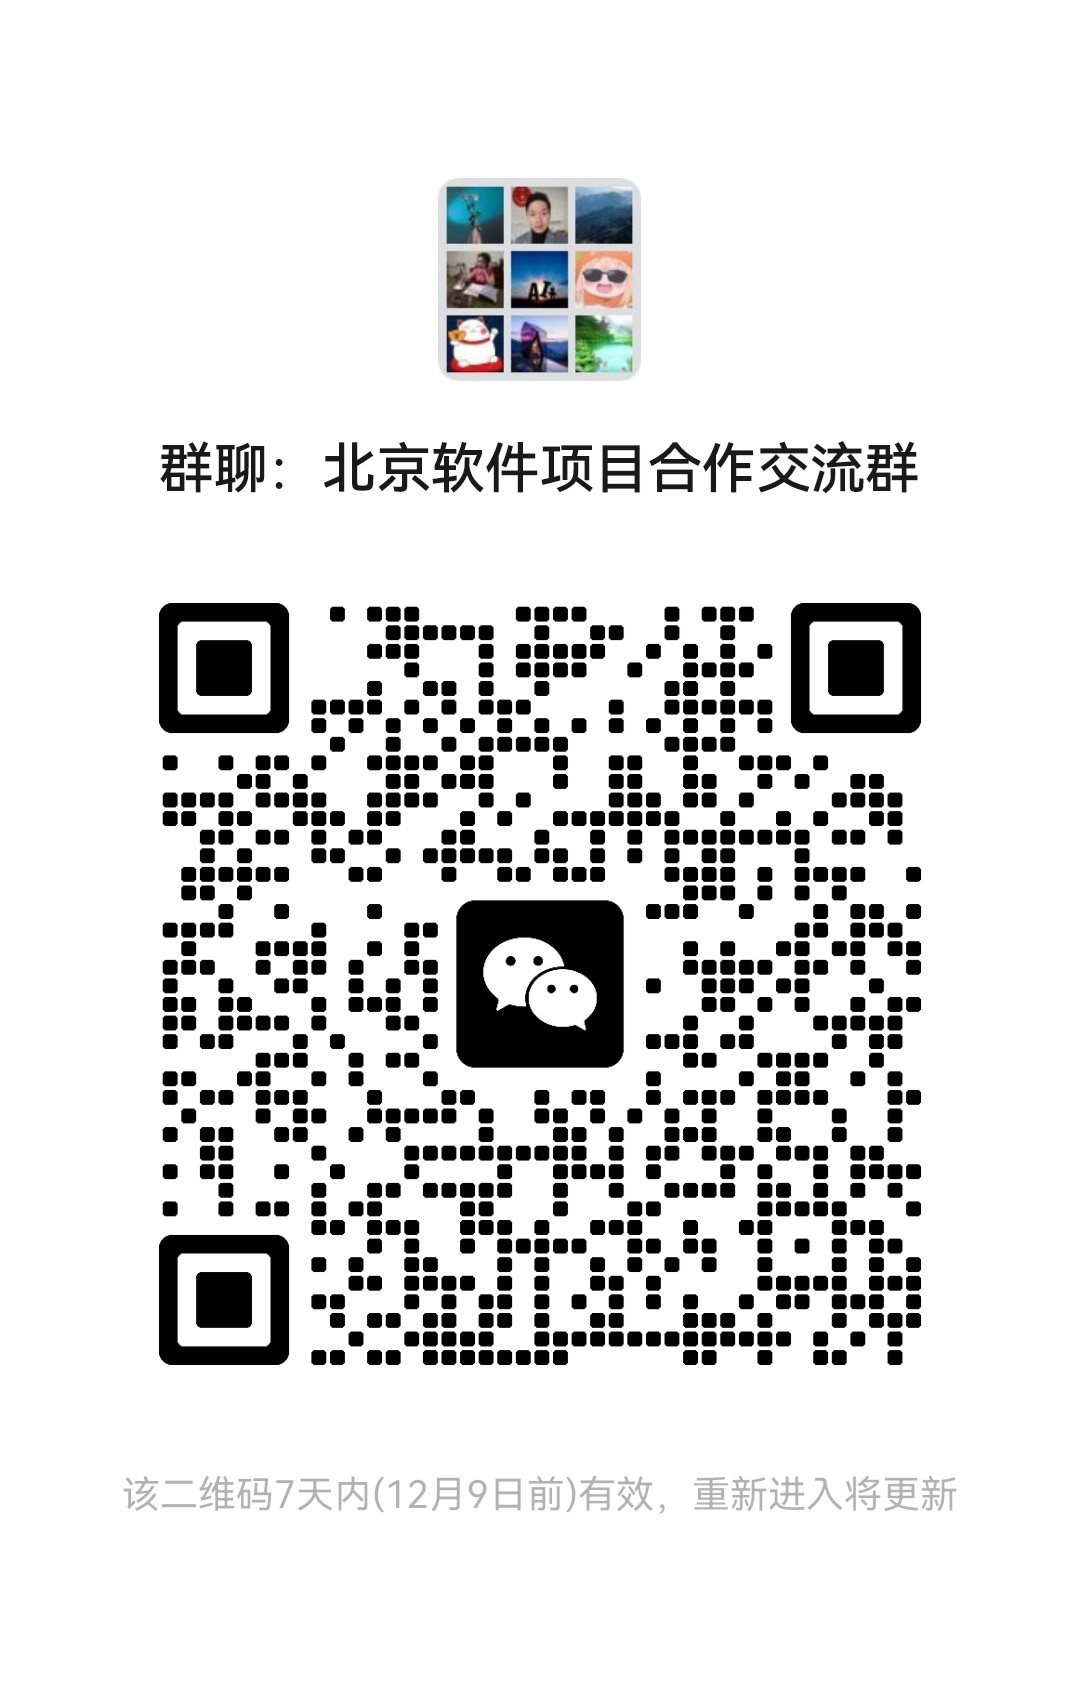 mmqrcode1701490936198.png